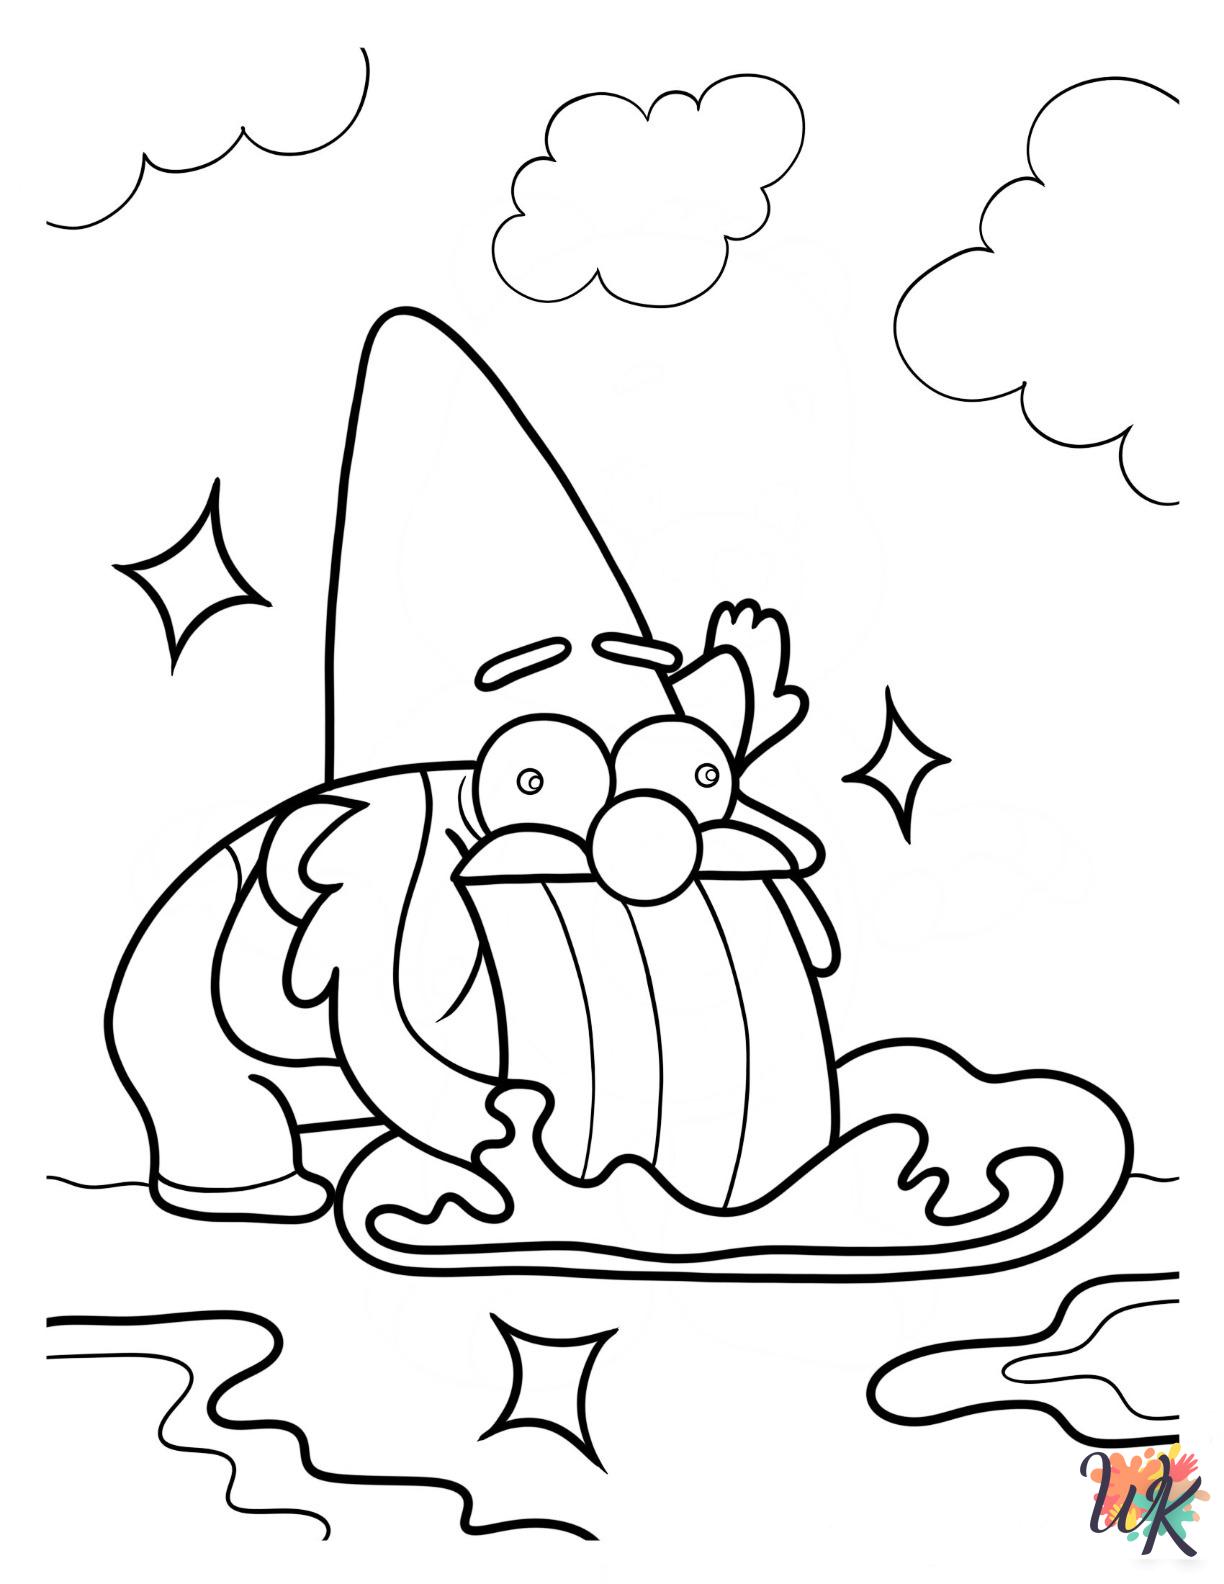 Gravity Falls coloring pages for adults